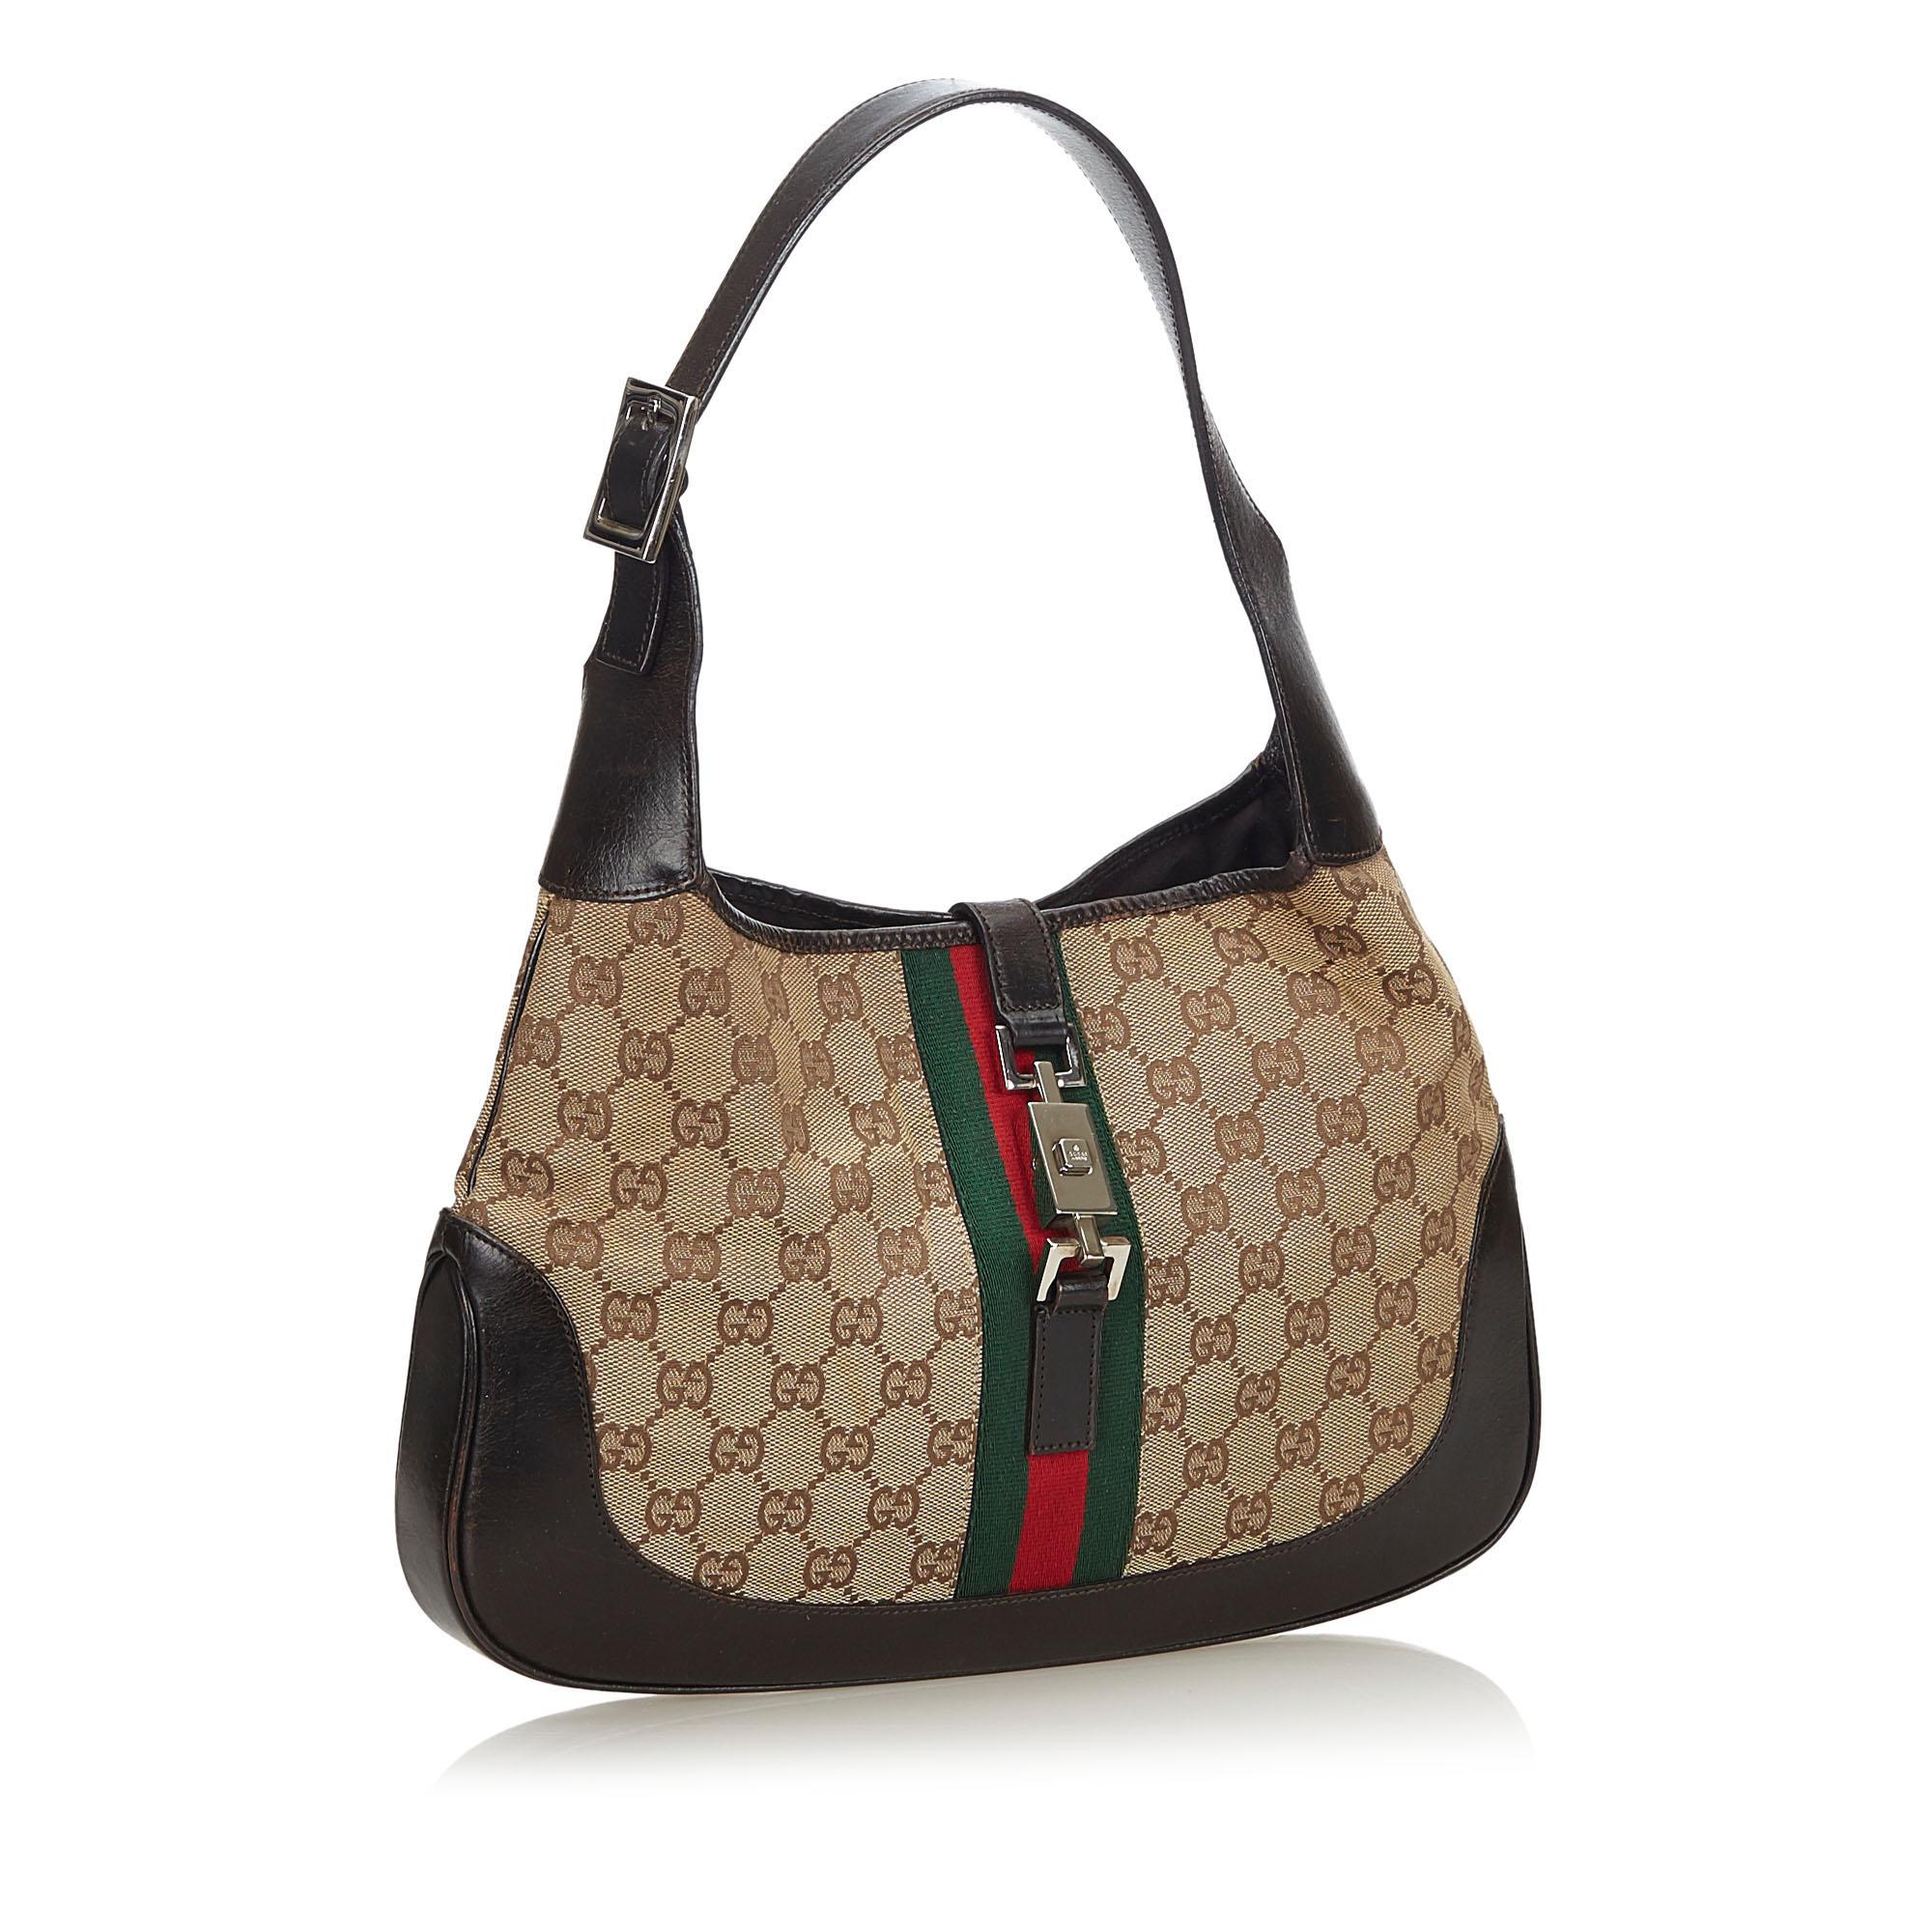 The Jackie features a canvas body with leather trim, a flat leather strap, an open top with a flat strap and a push lock closure, and an interior zip pocket. It carries as B condition rating.

Inclusions: 
Dust Bag
Dimensions:
Length: 21.00